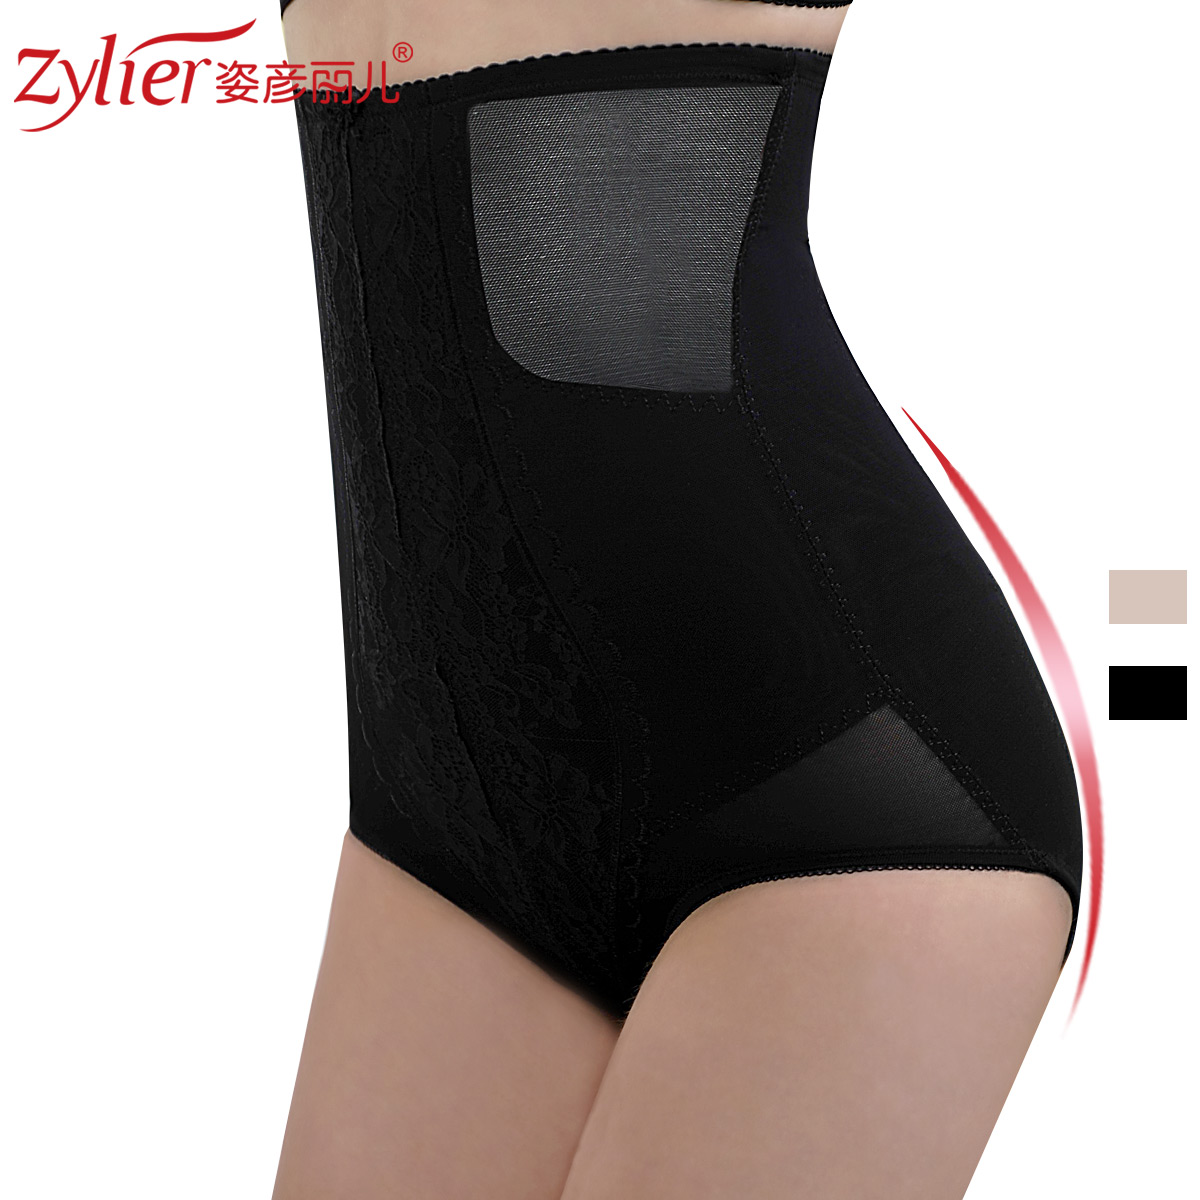 2012 autumn and winter high waist body shaping pants body shaping panties abdomen drawing pants sk79